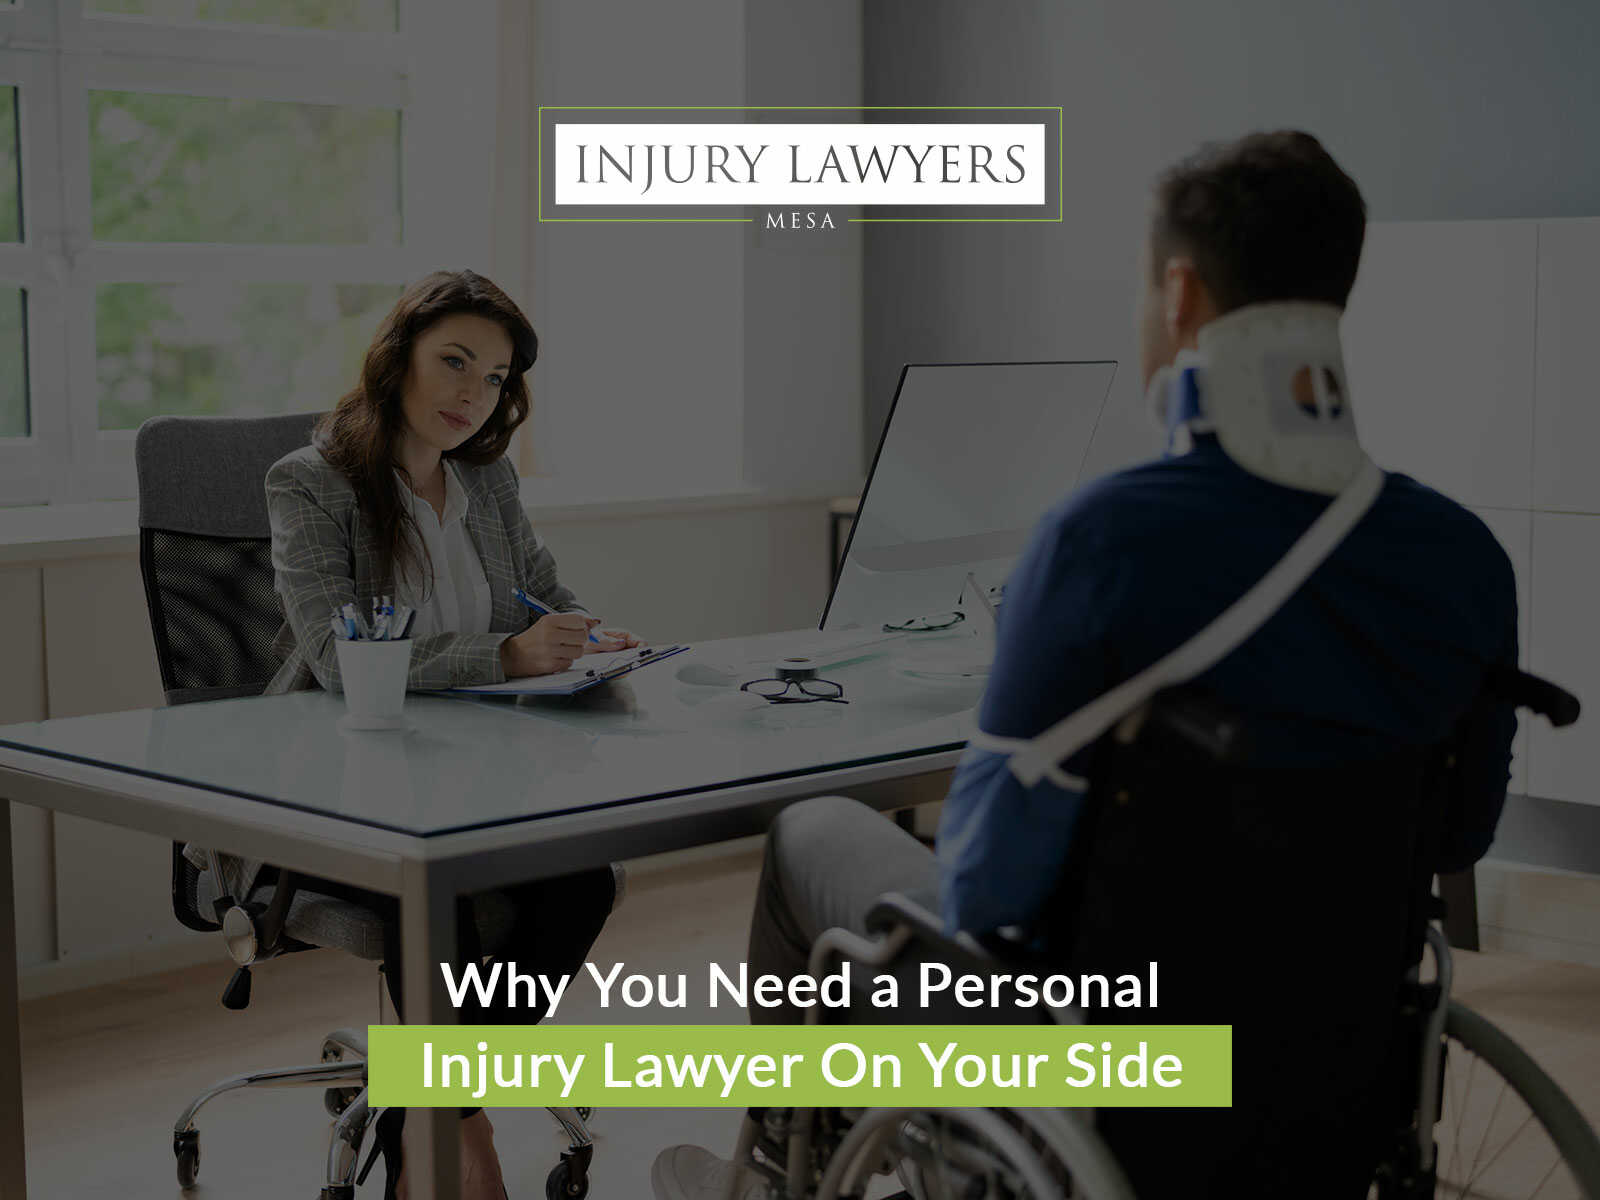 Why You Need a Personal Injury Lawyer On Your Side